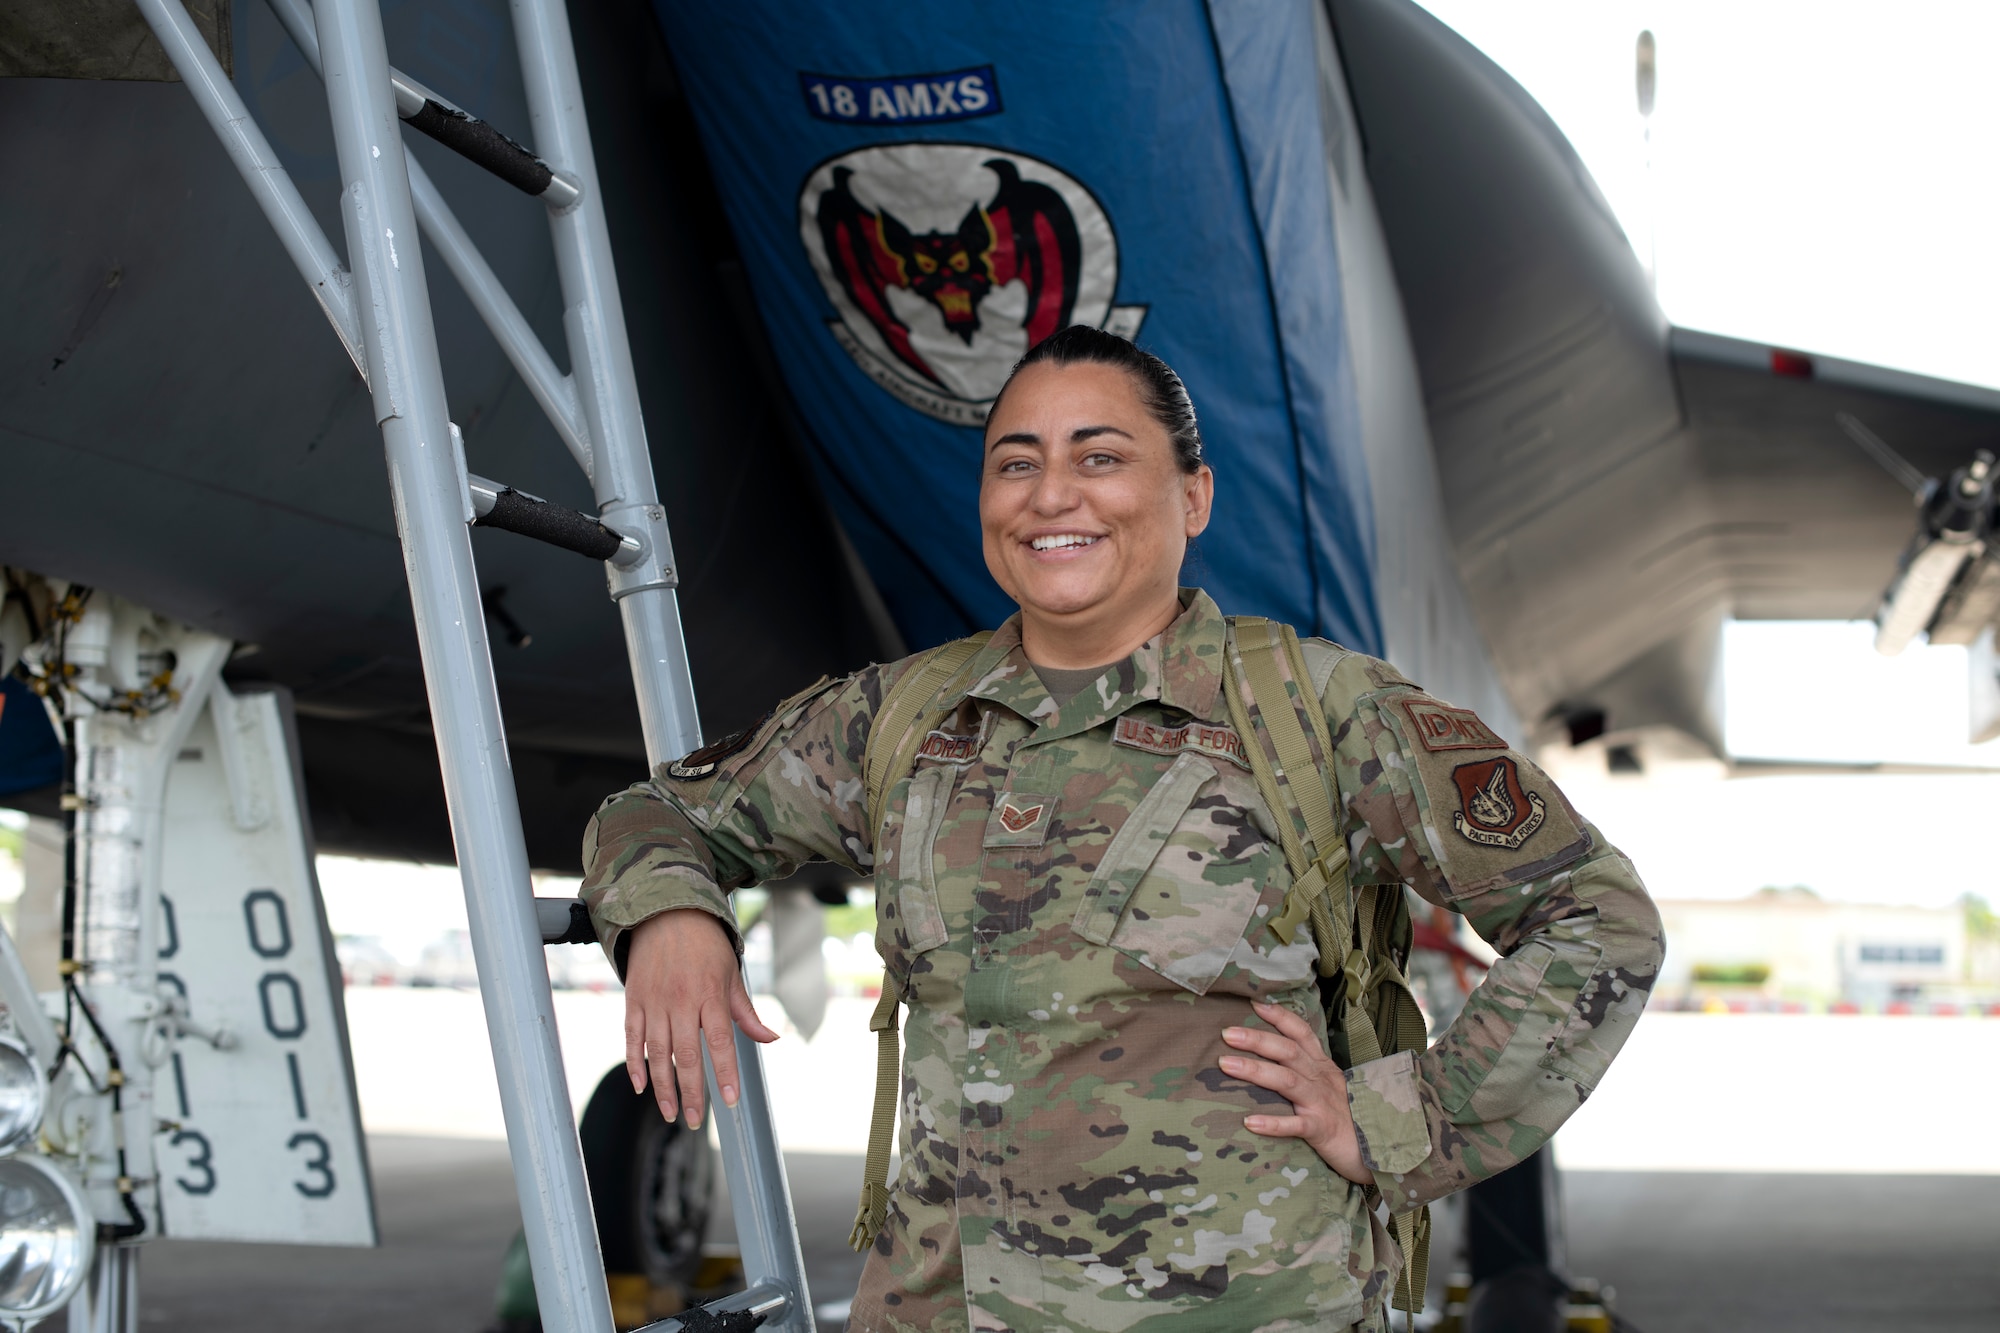 U.S. Air Force Staff Sgt. Linda Moreno, an independent duty medical technician assigned to the 44th Fighter Squadron, poses for a photo on the flightline at Kadena Air Base, Japan, April 4, 2022. An IDMT is an enlisted individual who is trained to provide health care in the absence of a physician at medical treatment facilities, and remote or deployed locations. (U.S. Air Force photo by Senior Airman Jessi Monte)